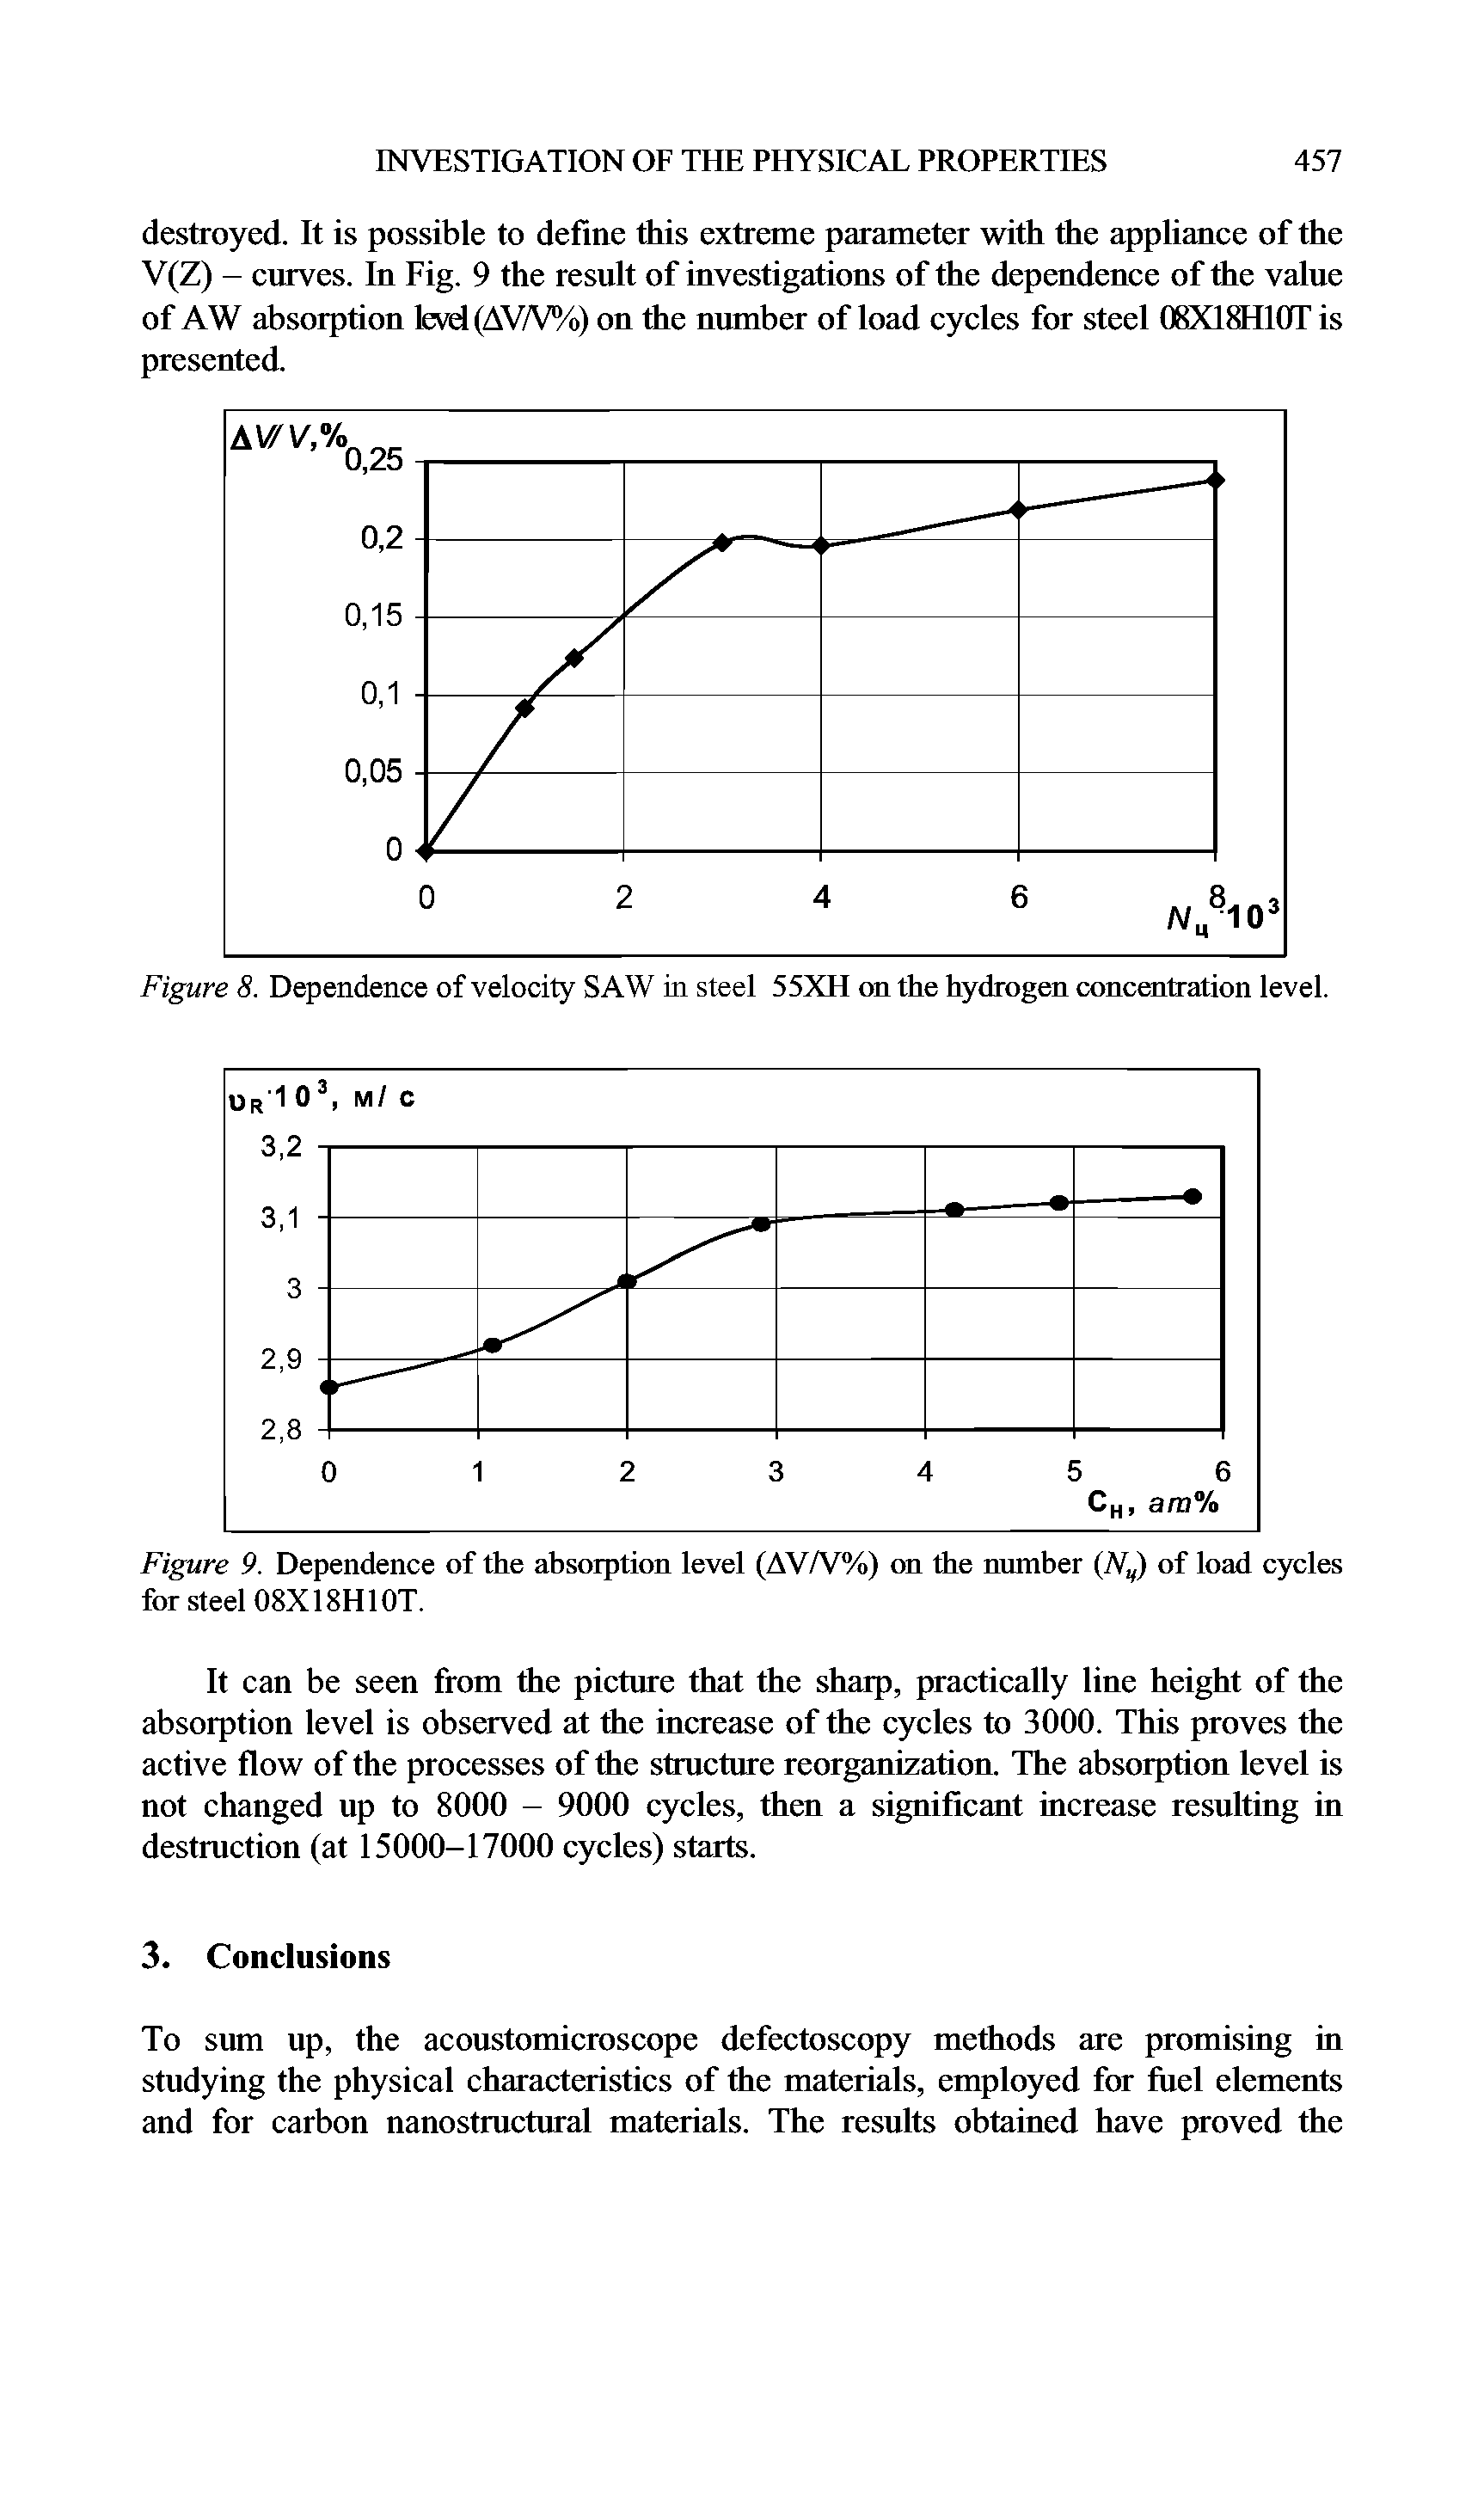 Figure 9. Dependence of the absorption level (AV/V%) on the number (NH) of load cycles for steel 08X18H10T.